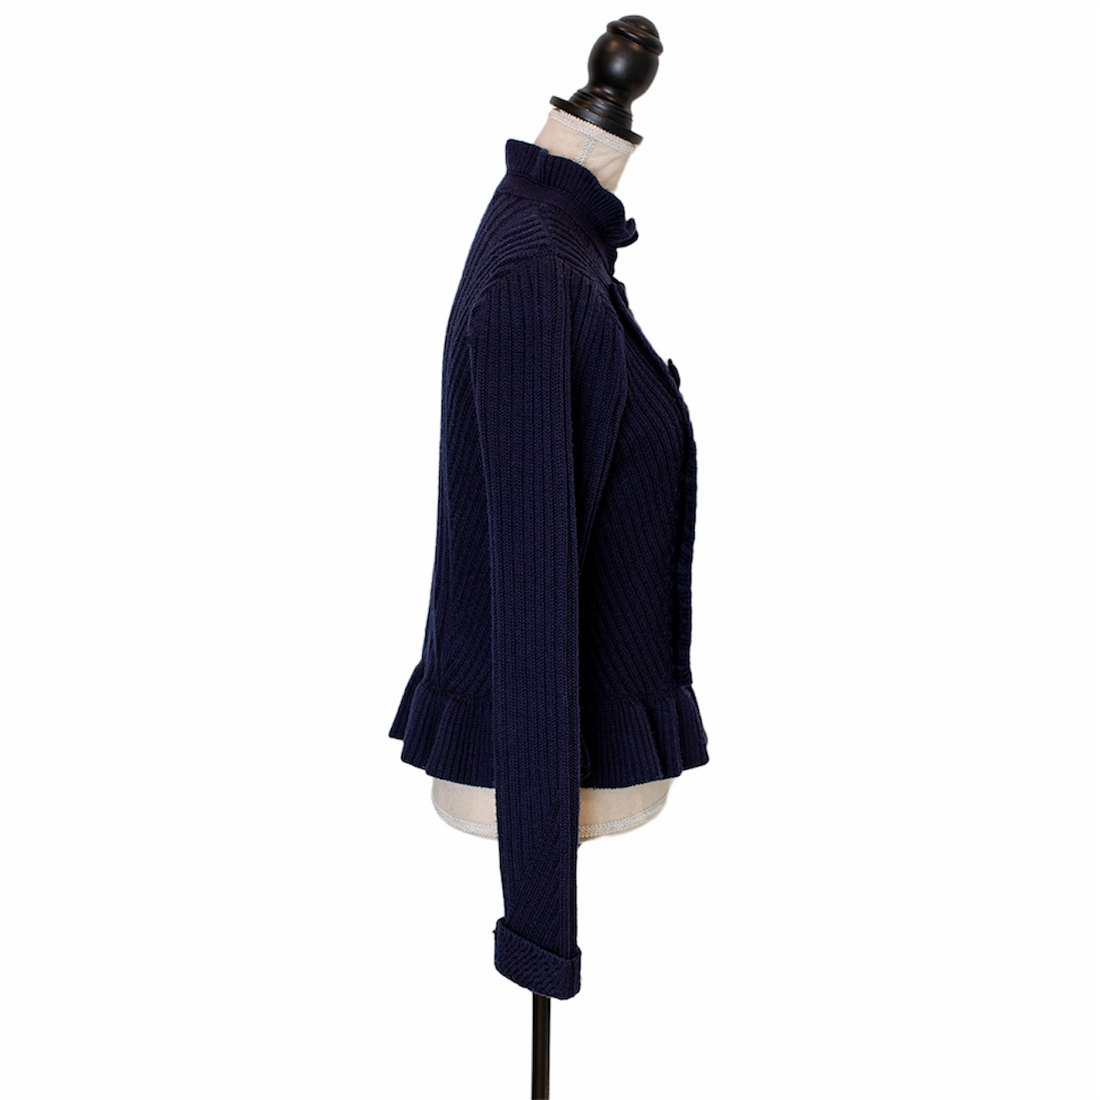 Marc By Marc Jacobs Doppelreihiger Cardigan mit Volants